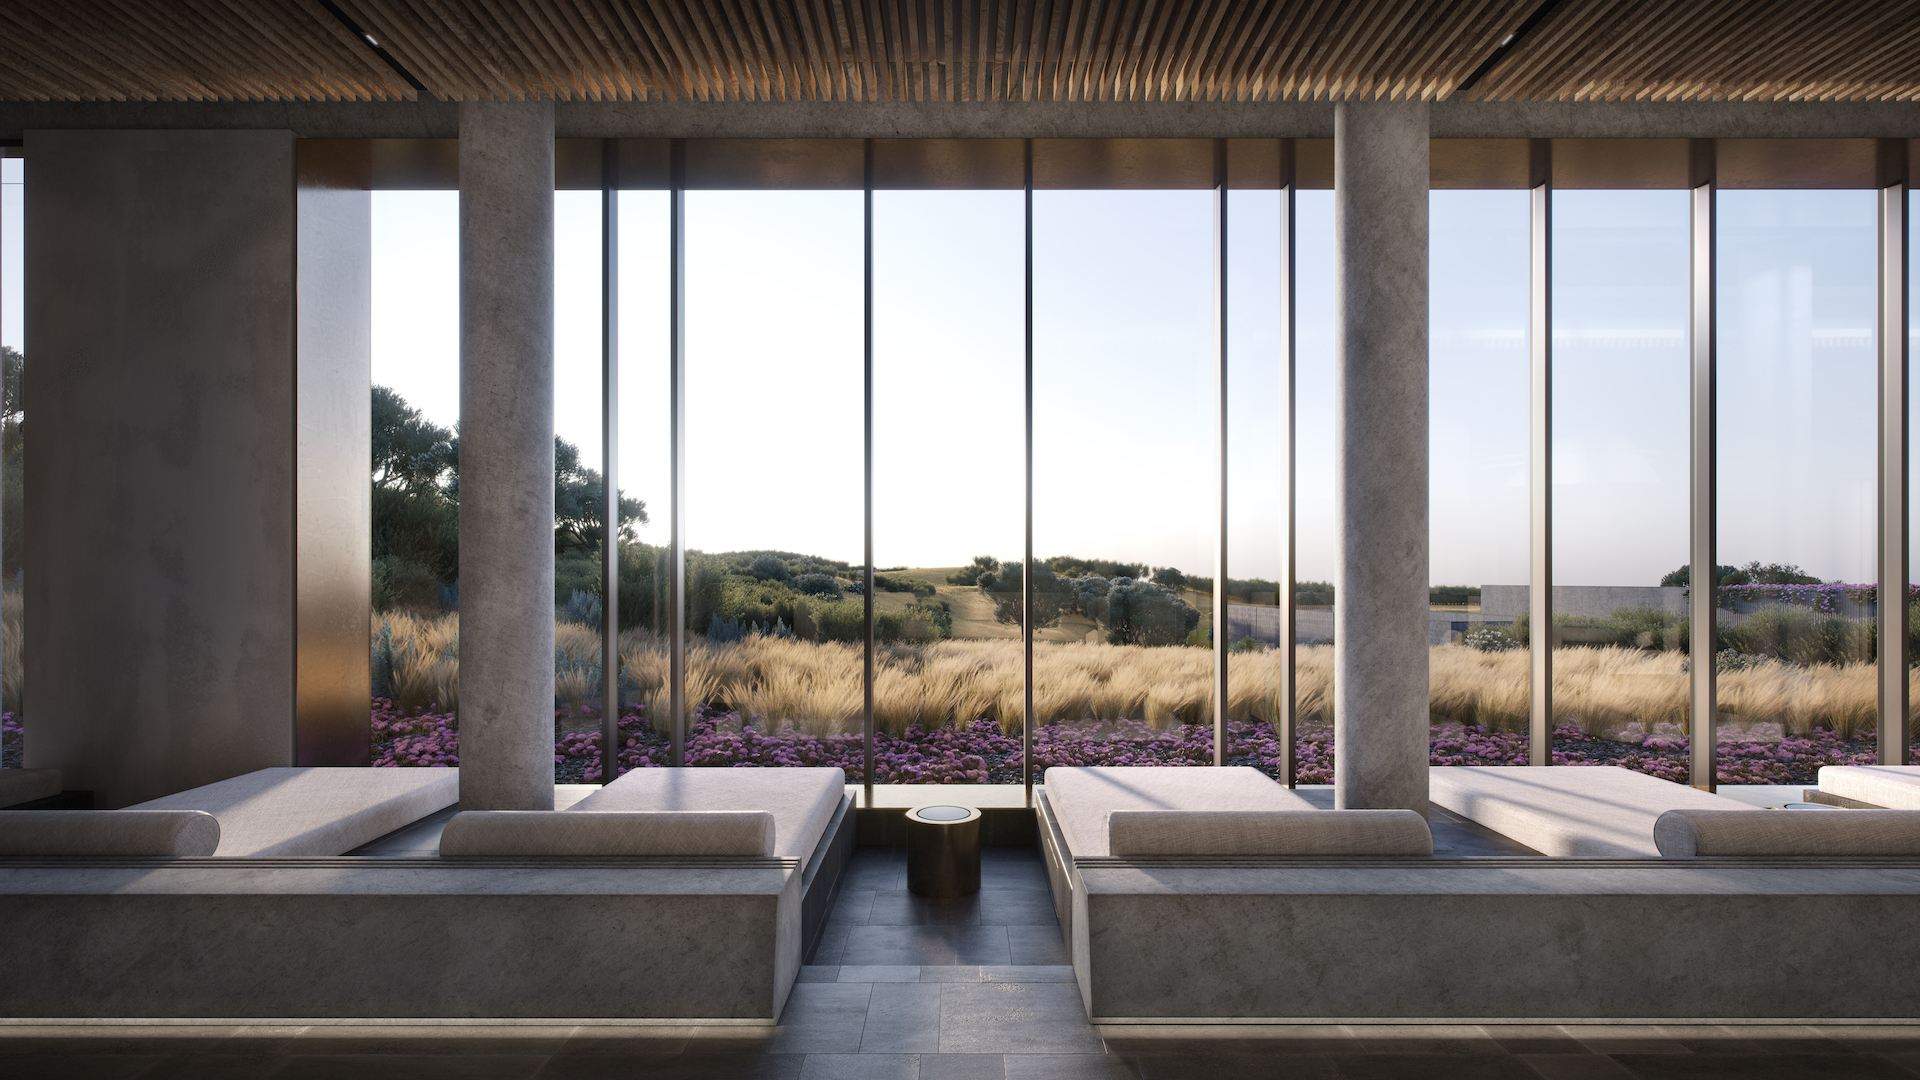 Alba Thermal Springs & Spa Is the Luxe New Wellness Destination Coming to the Mornington Peninsula